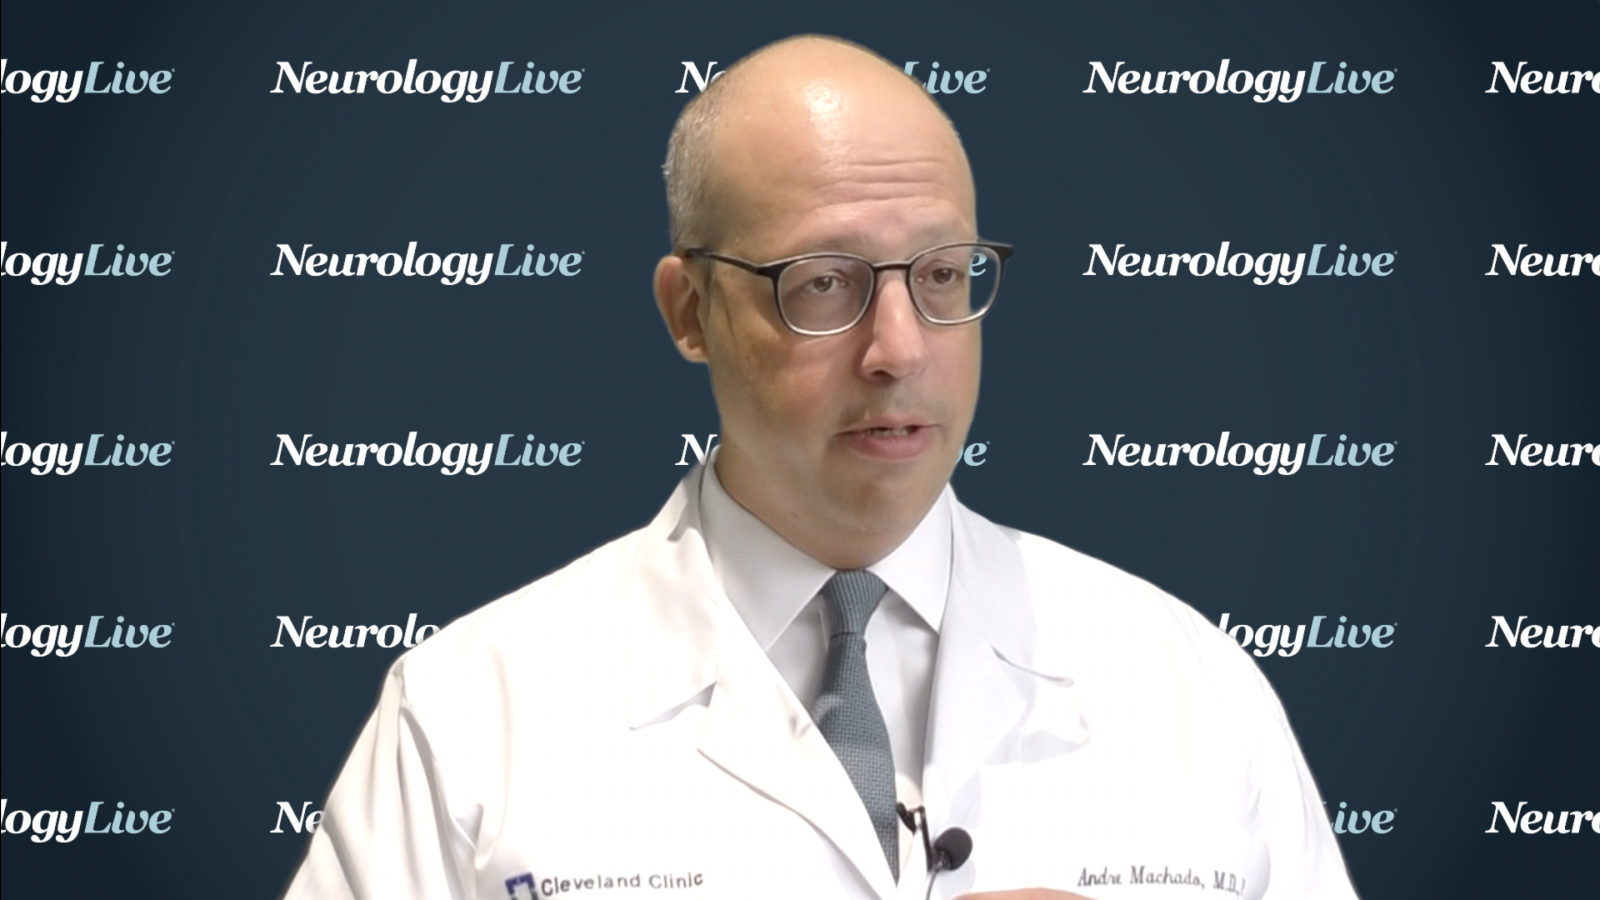 Andre Machado, MD, PhD: Using DBS and FUS in Complementary Fashion